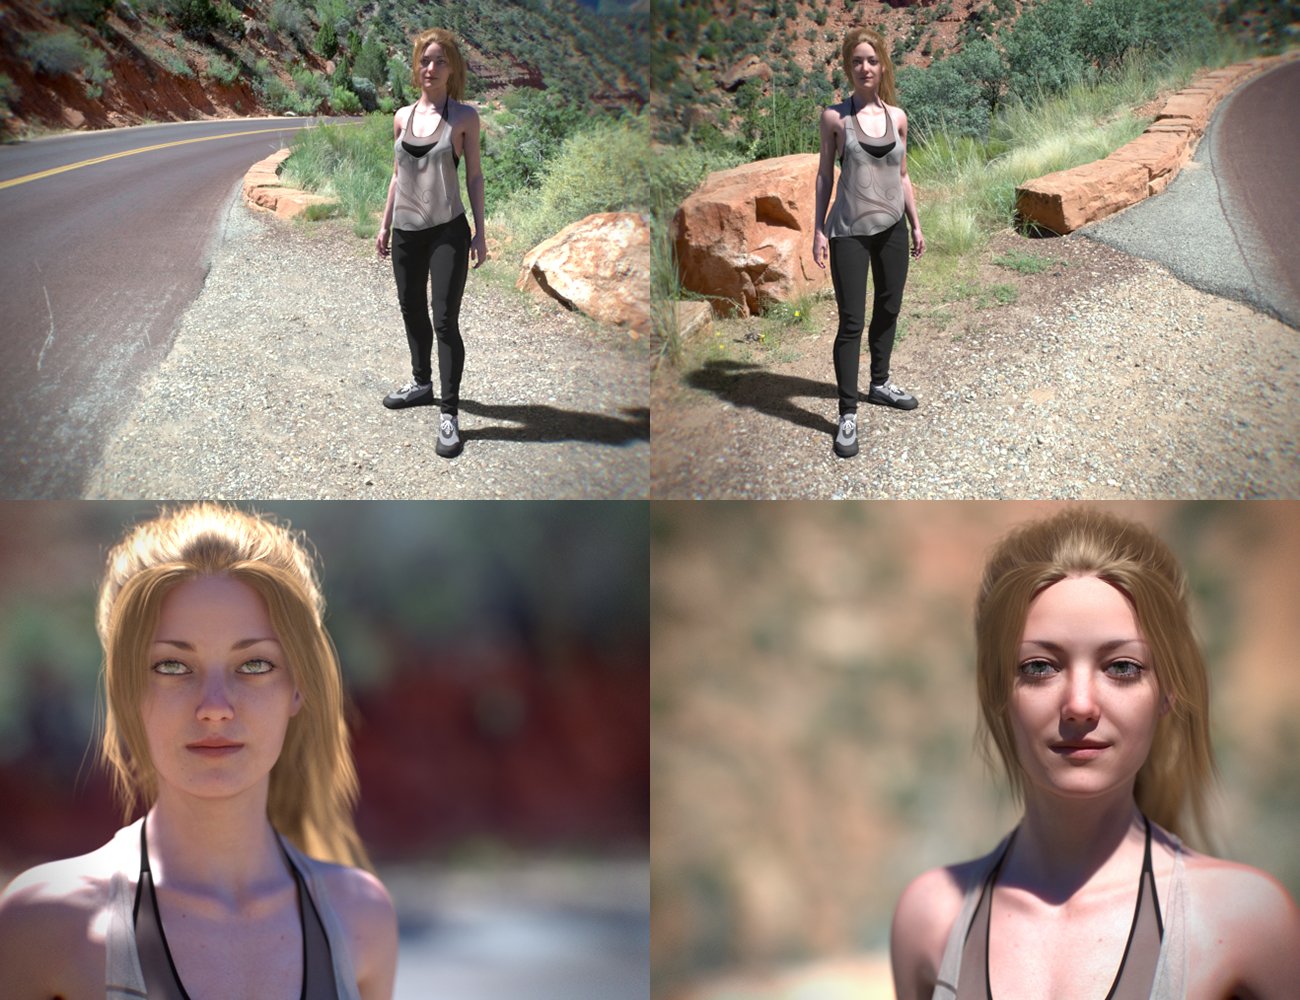 iRadiance Pro Series 16k HDRIs - Zion National Park by: DimensionTheory, 3D Models by Daz 3D